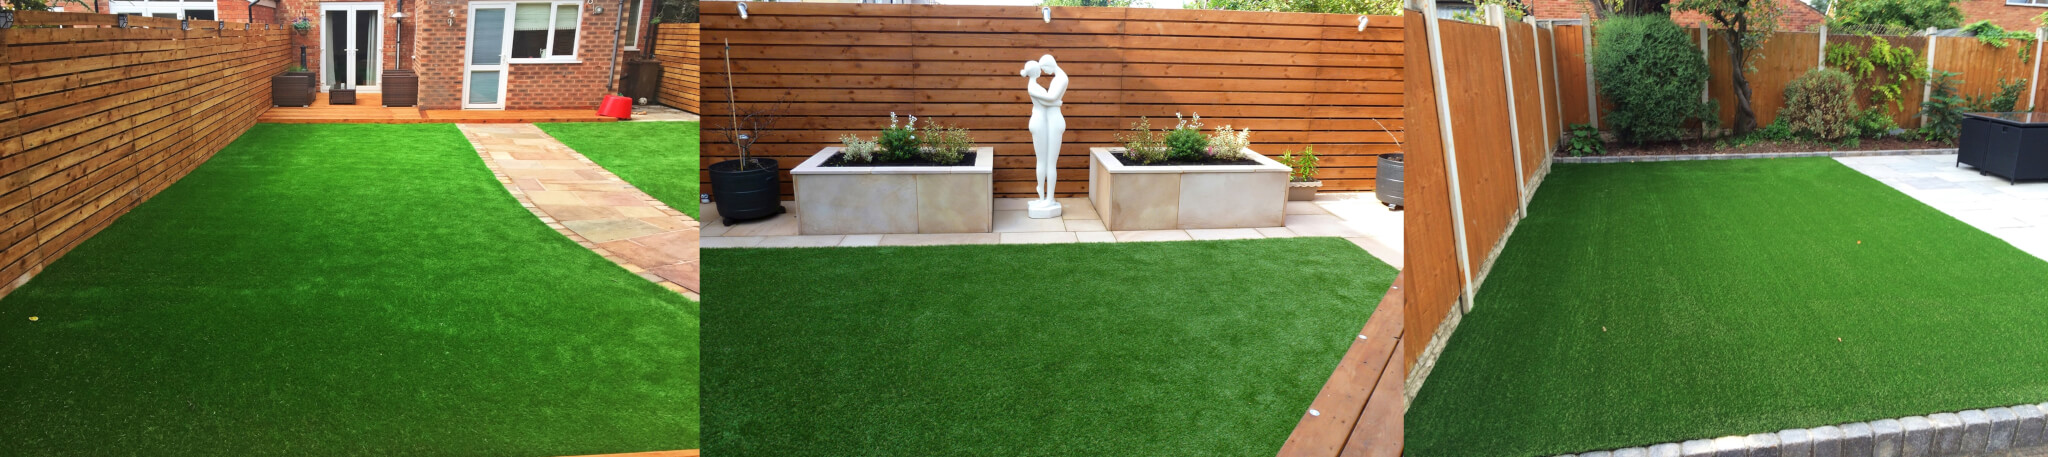 Artificial Lawn Cheshire